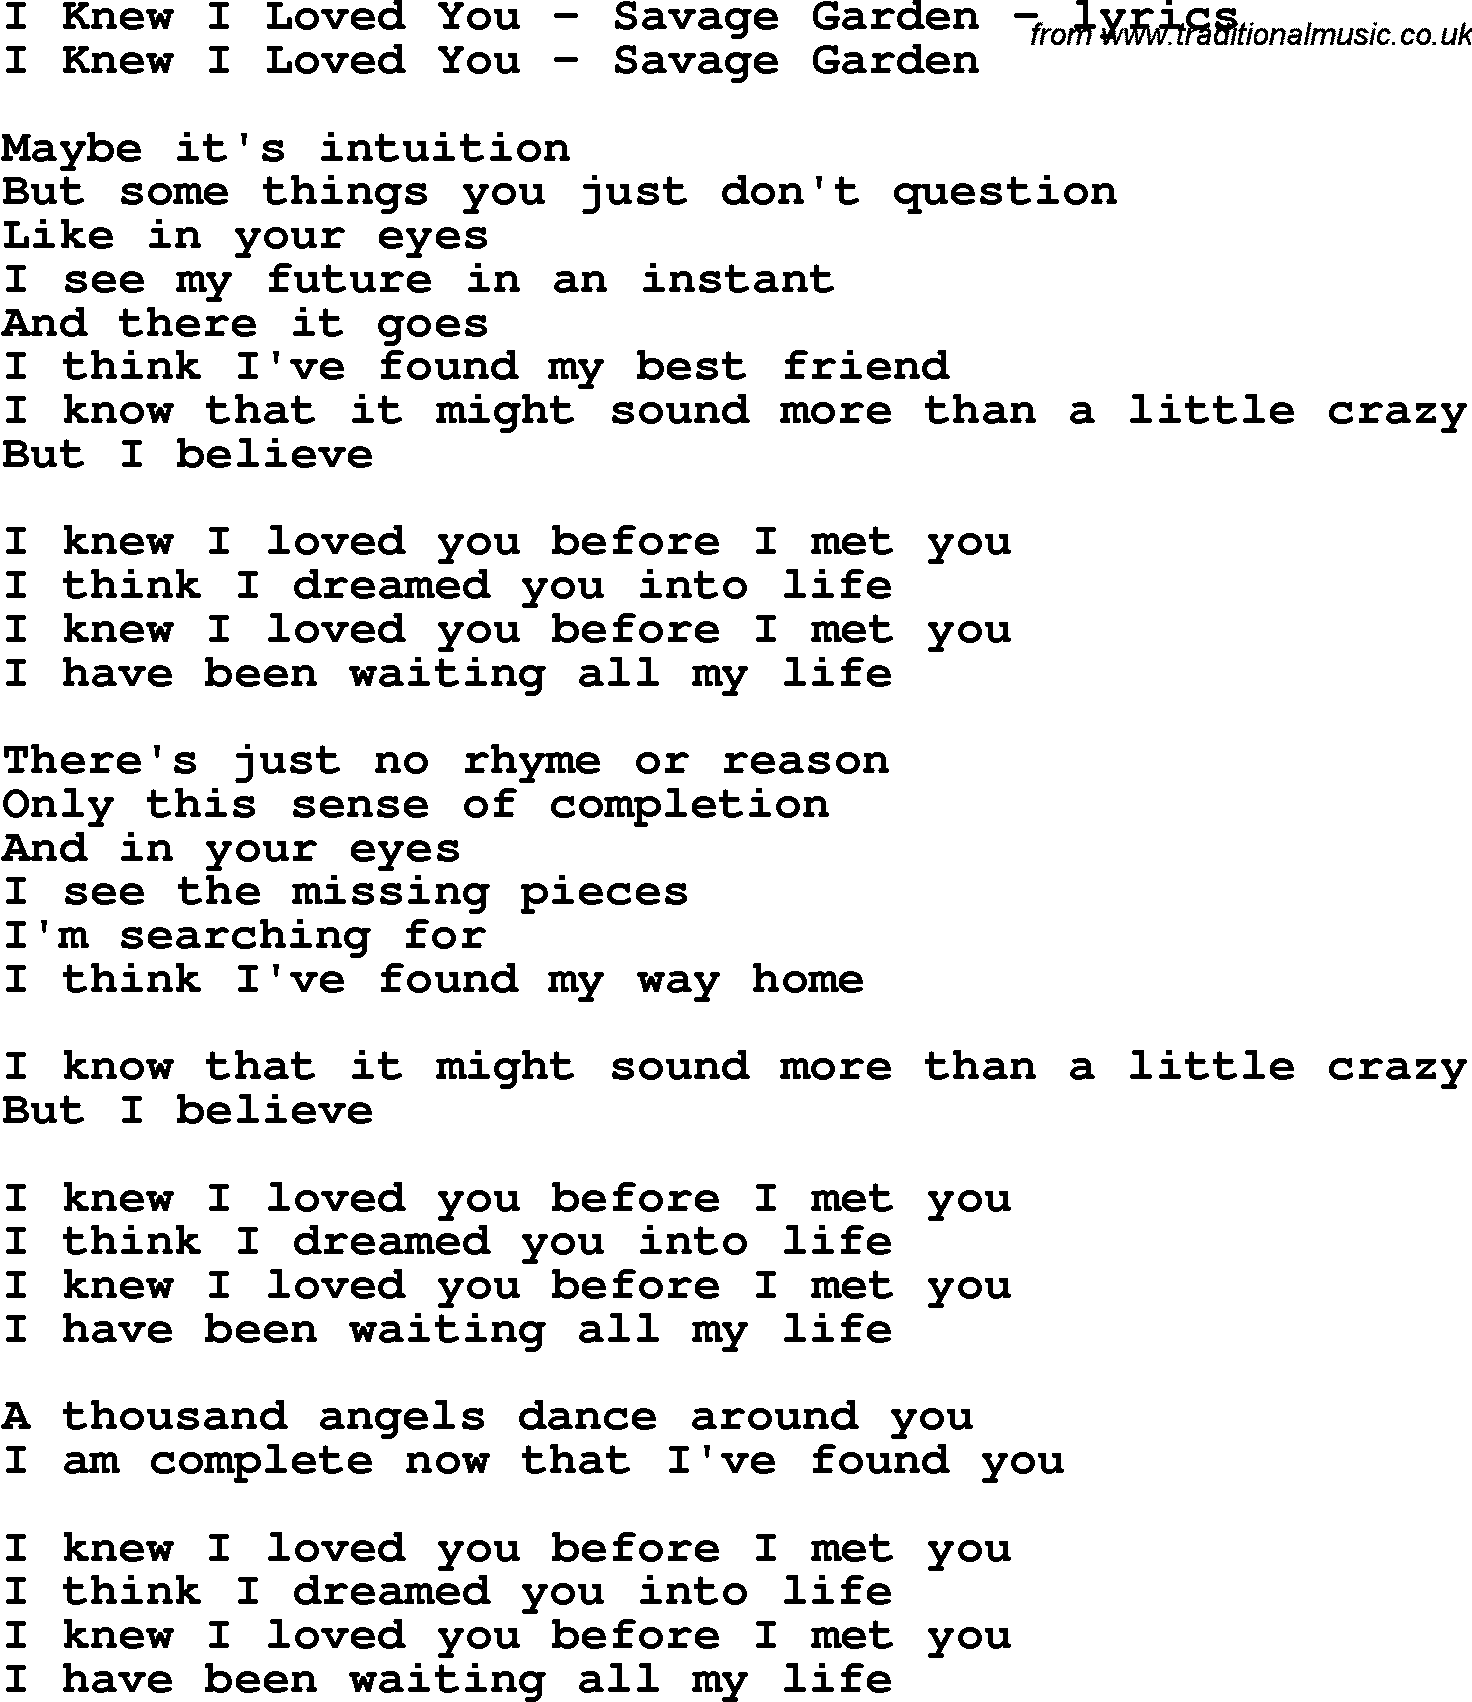 Love Song Lyrics For I Knew I Loved You Savage Garden